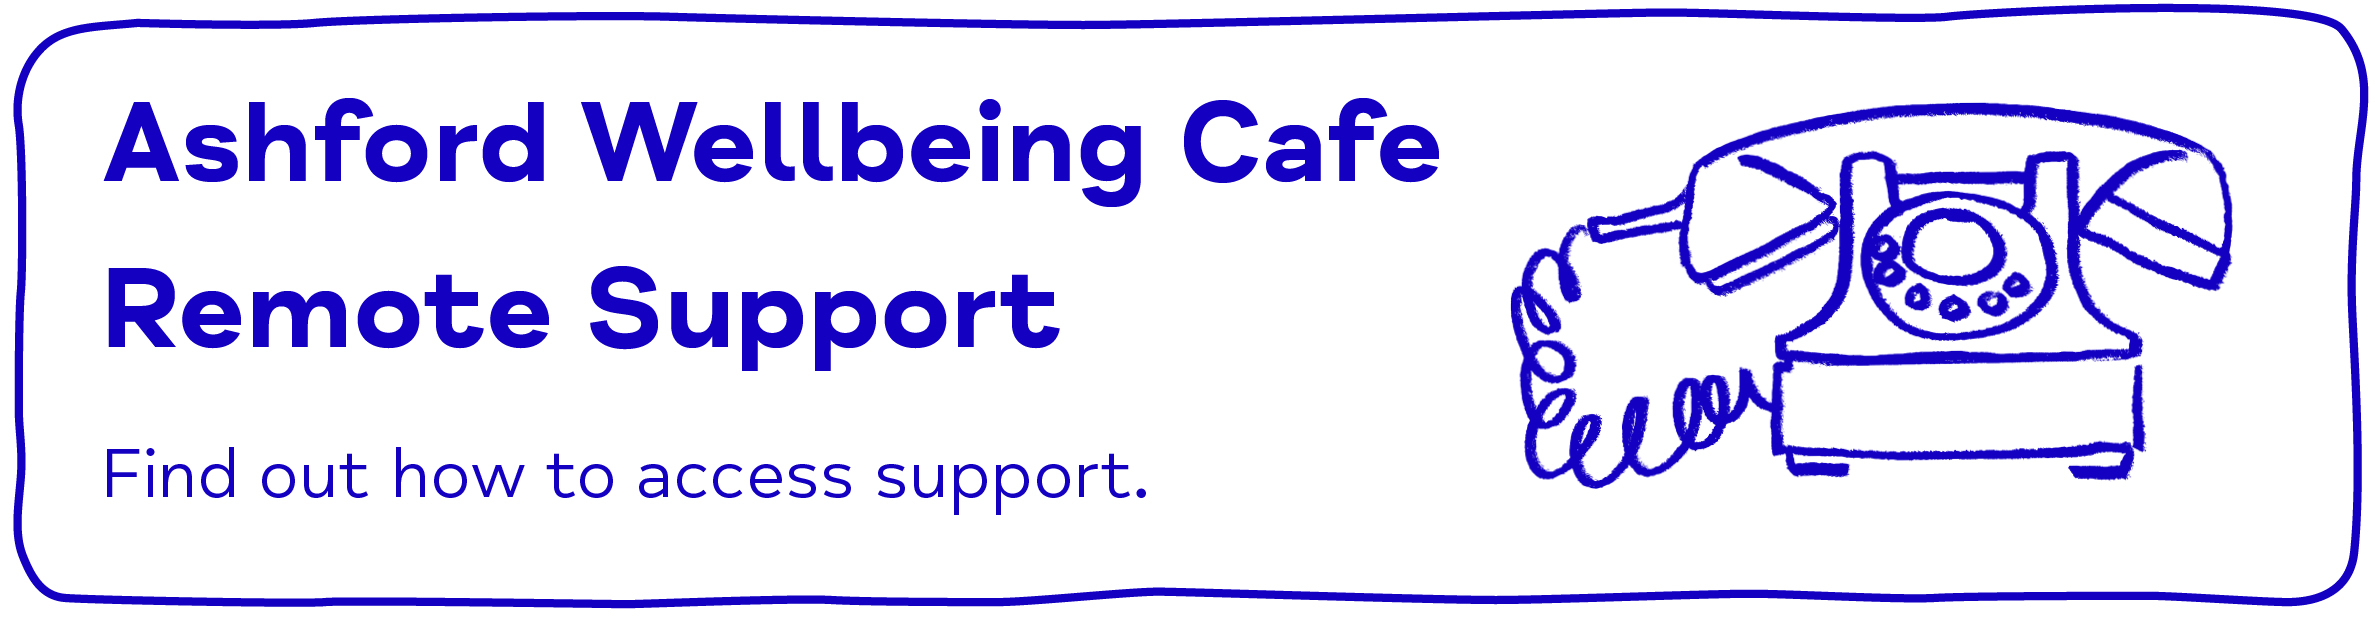 Ashford Wellbeing Cafe Remote Support - Find out how to access support.